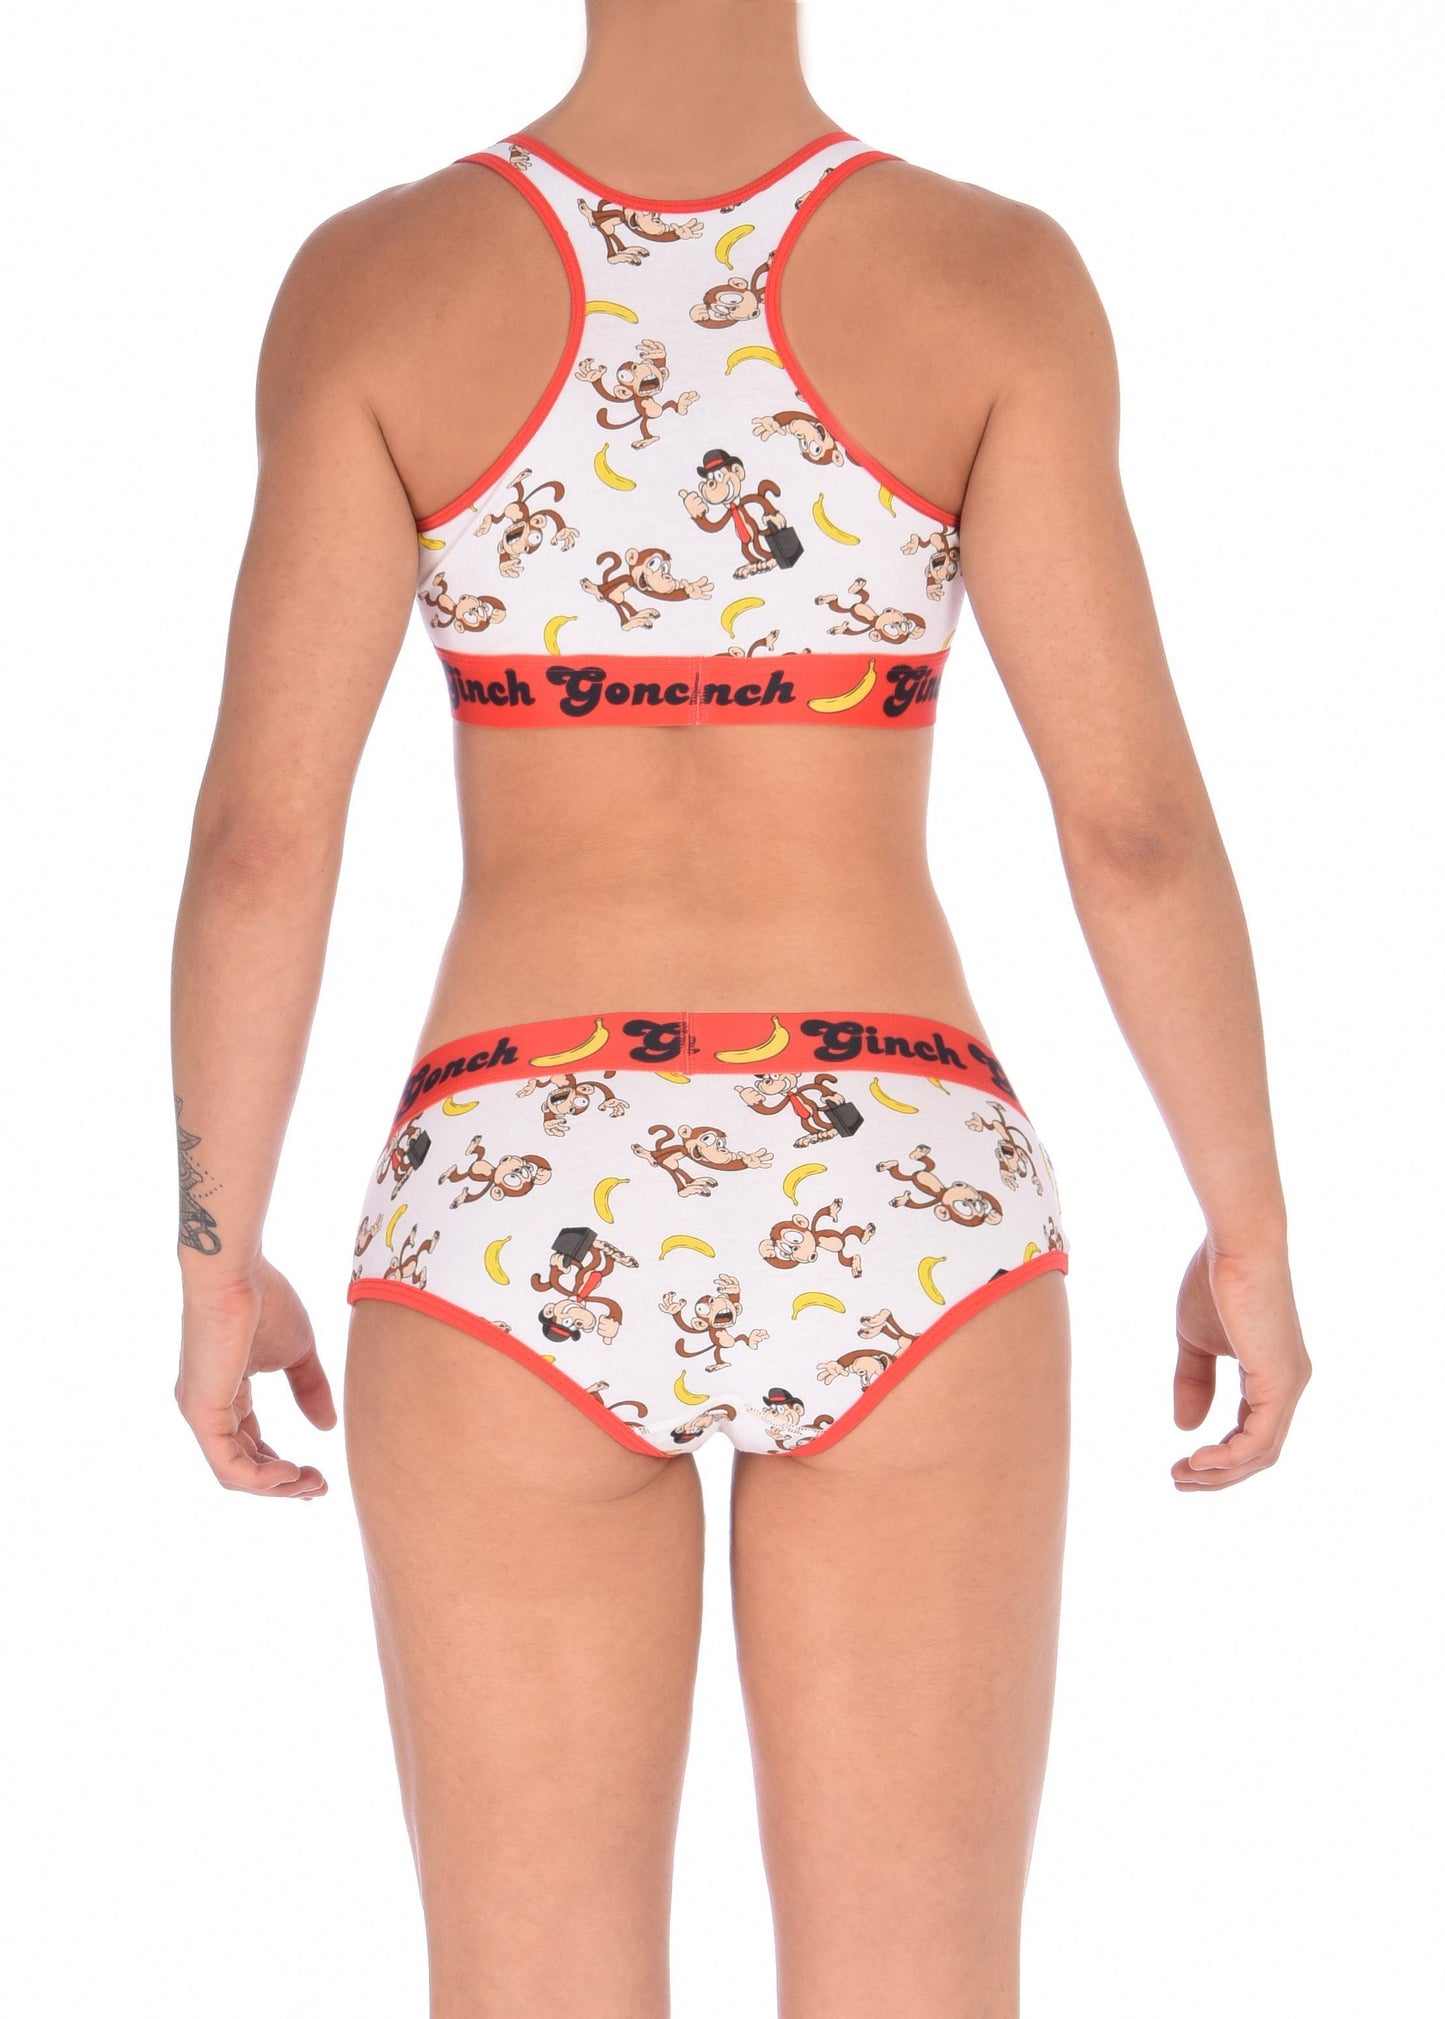 GG Ginch Gonch Gone Bananas boy cut Brief women's underwear y front white fabric with monkeys and bananas red trim and red printed waistband back shown with matching sports bra